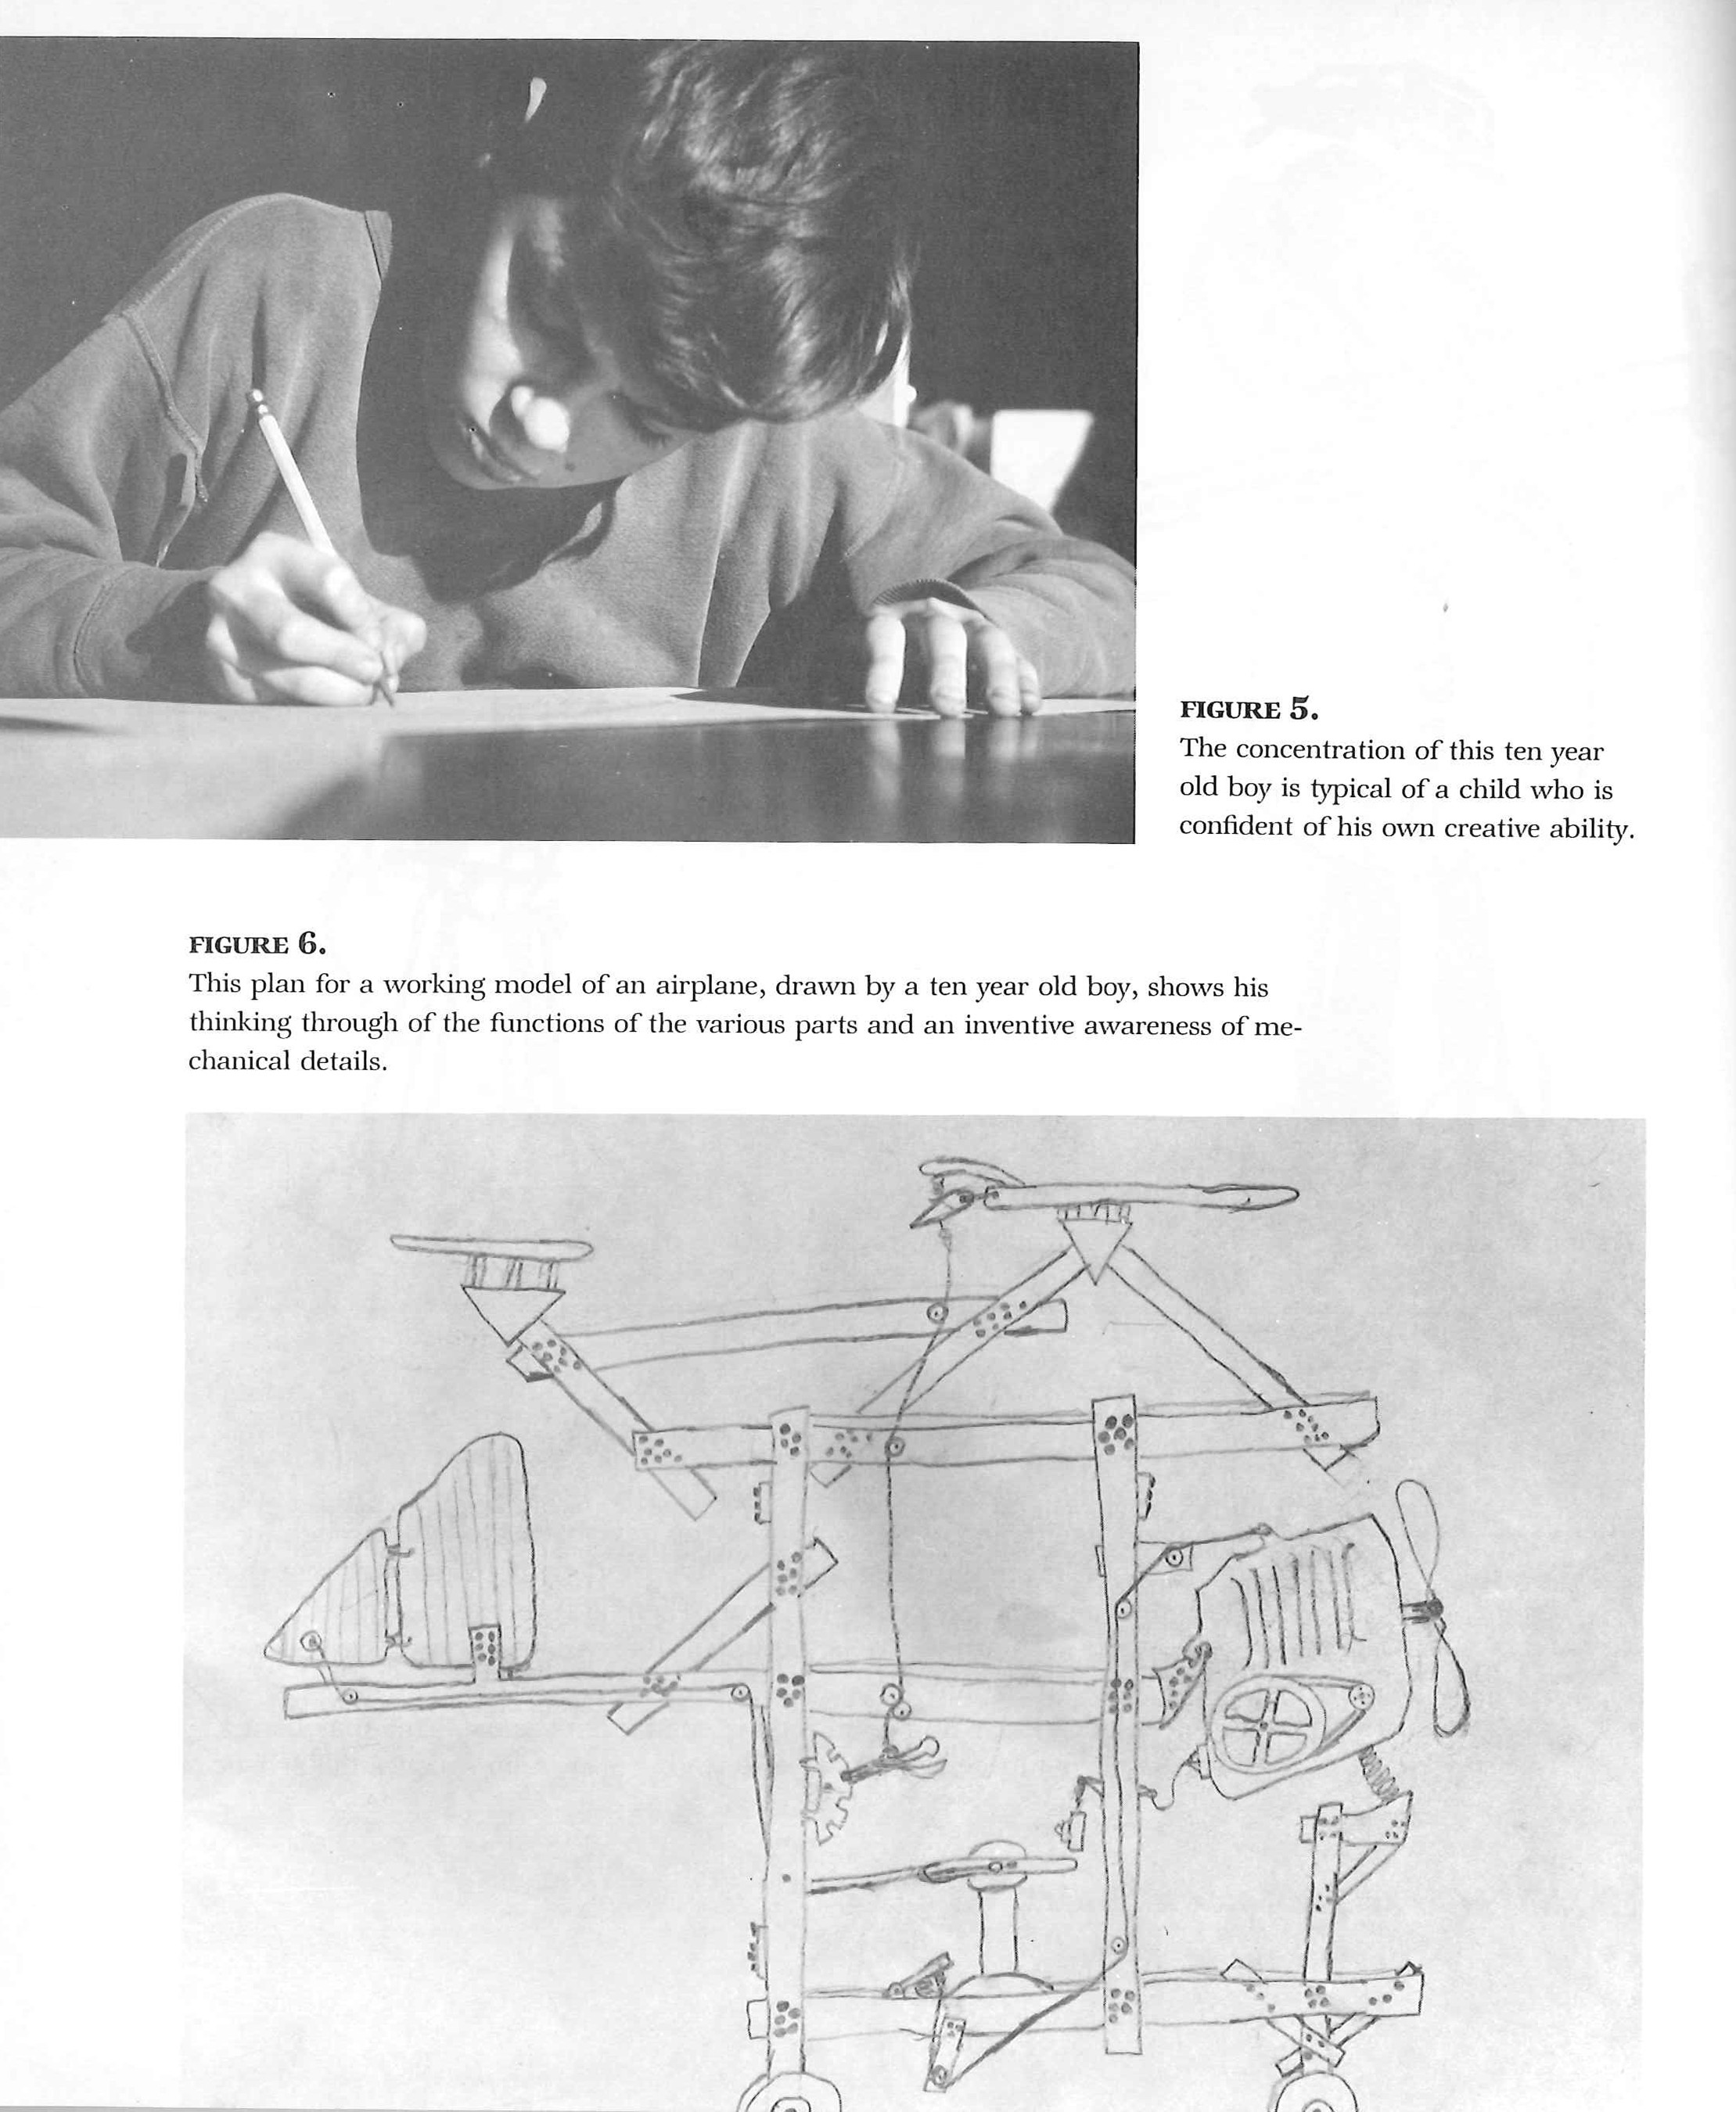 father of author drawing confidently (Fig 5) and his drawing of a working model of an airplane (Fig 6)